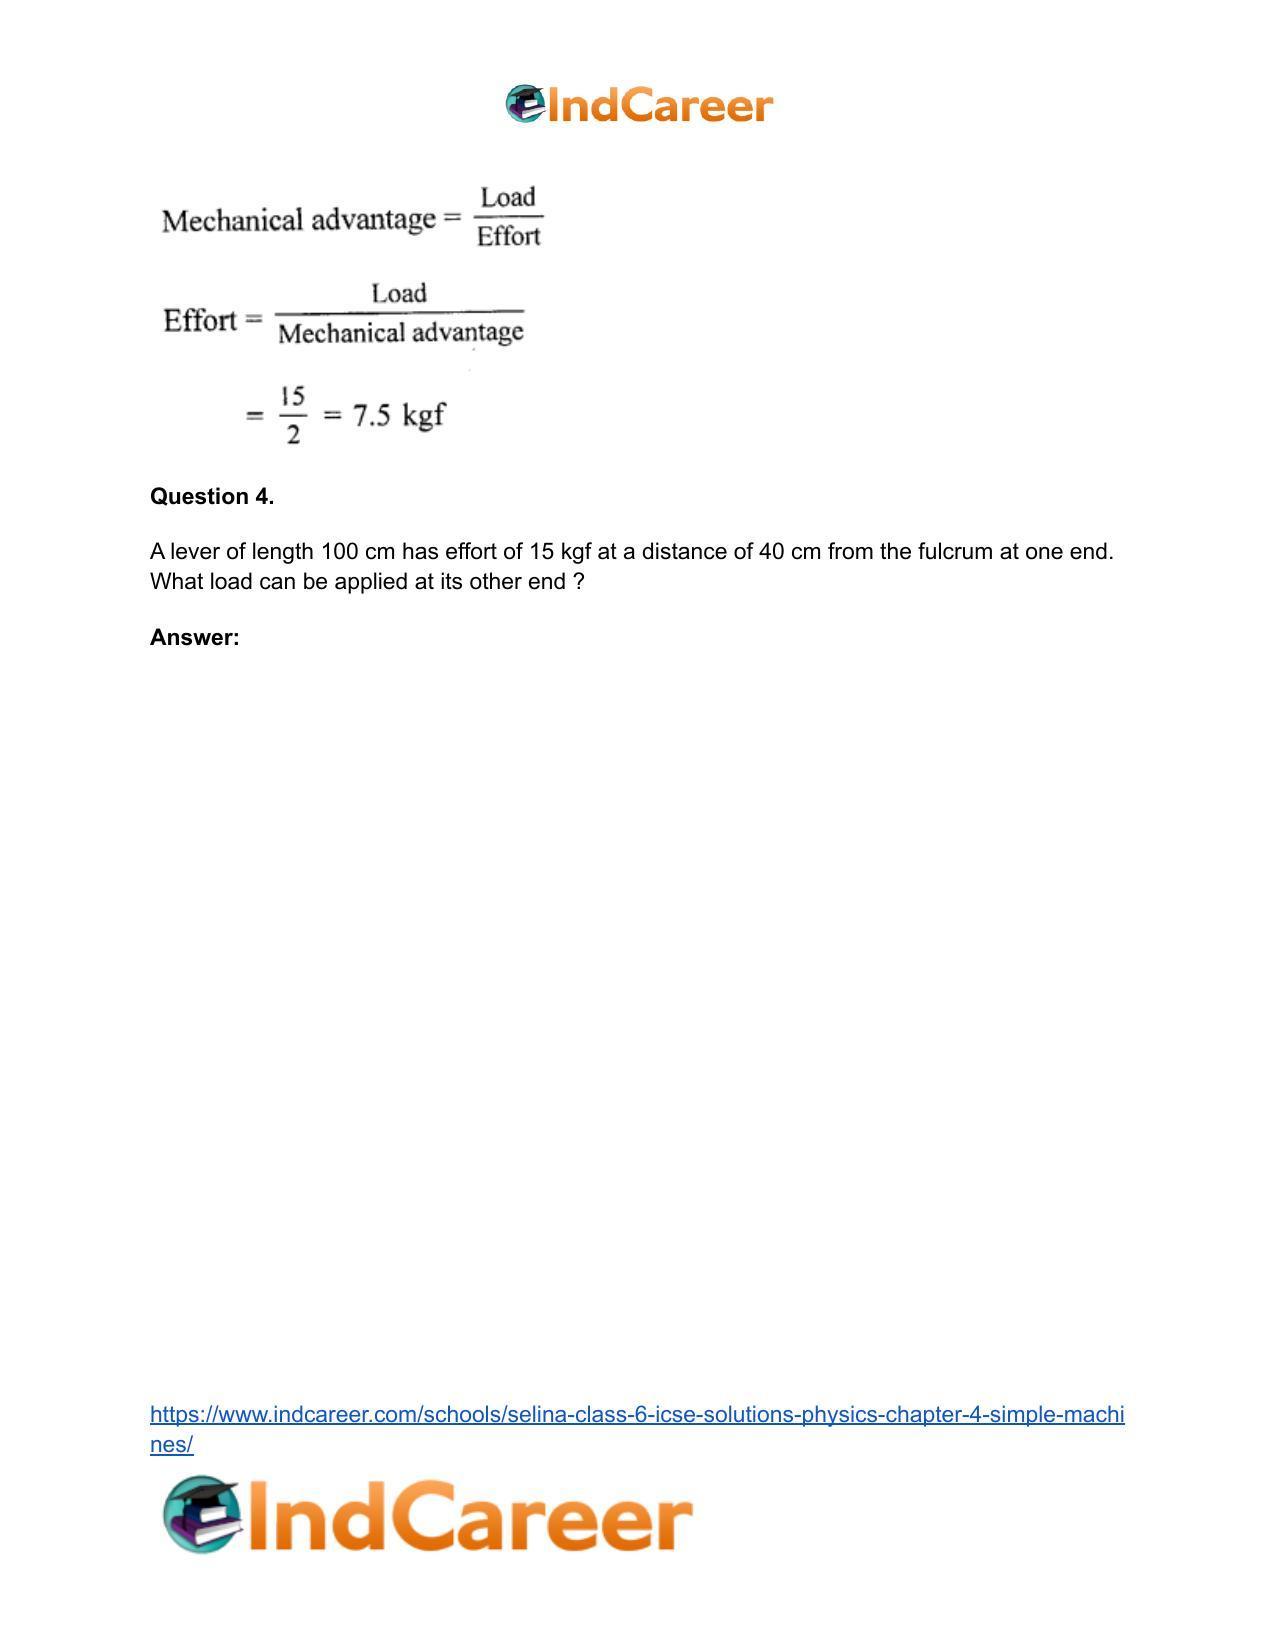 Selina Class 6 ICSE Solutions Physics : Chapter 4- Simple Machines - Page 22